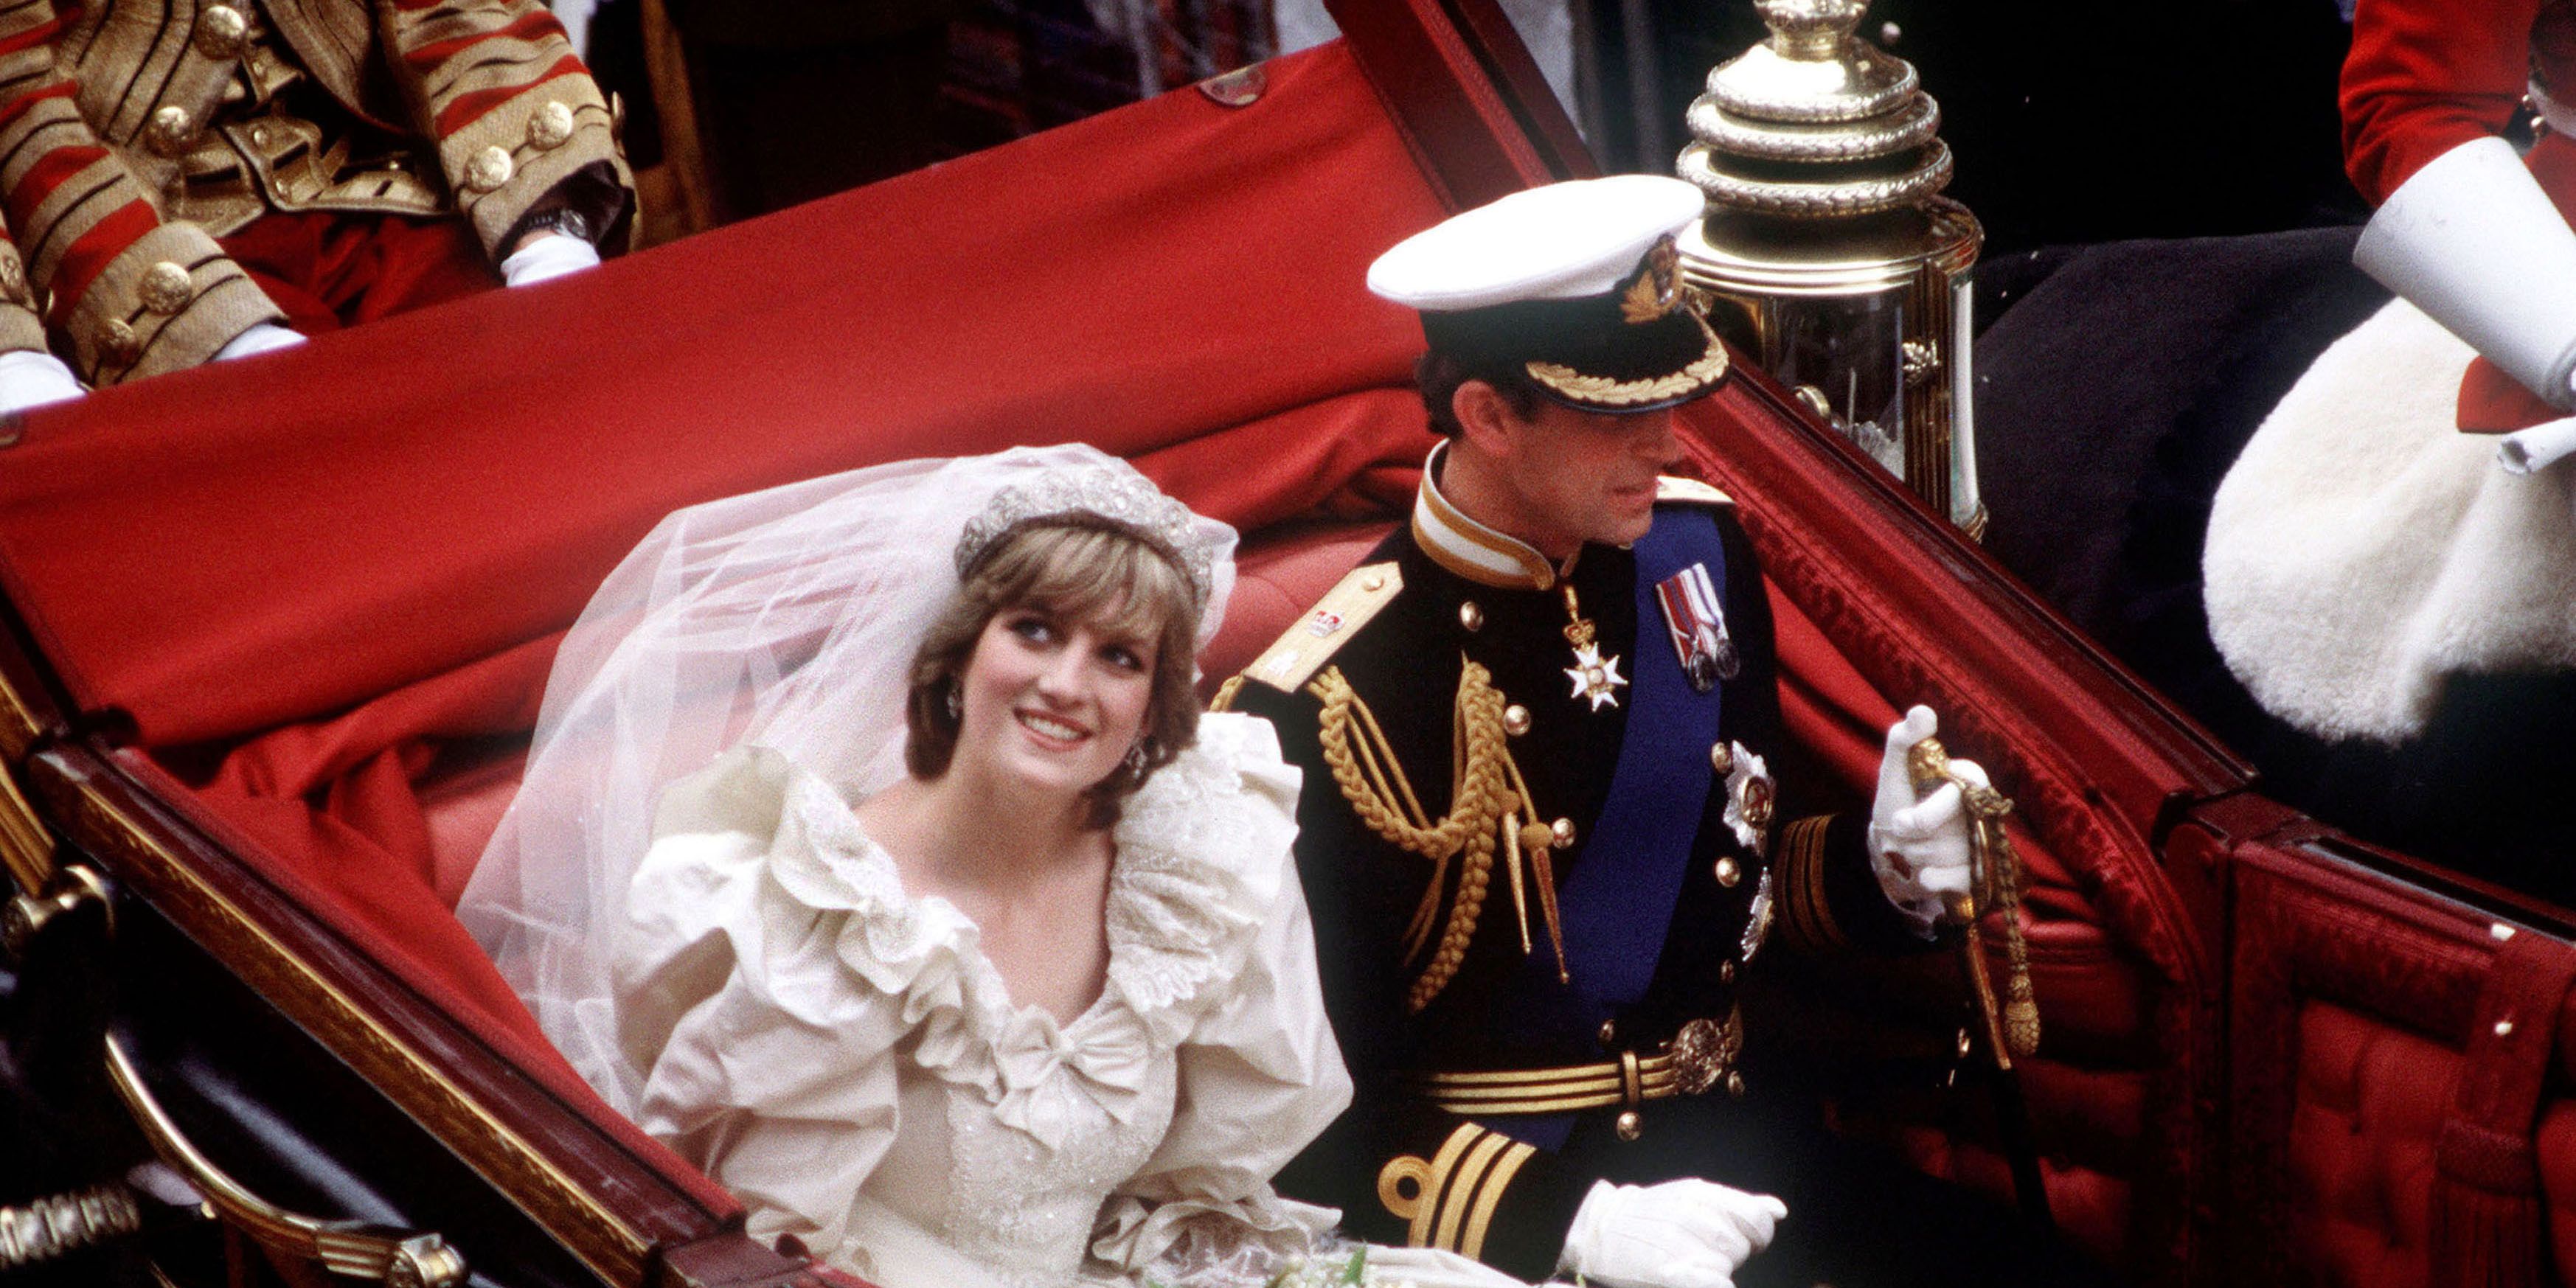 wedding of charles, prince of wales, and lady diana spencer